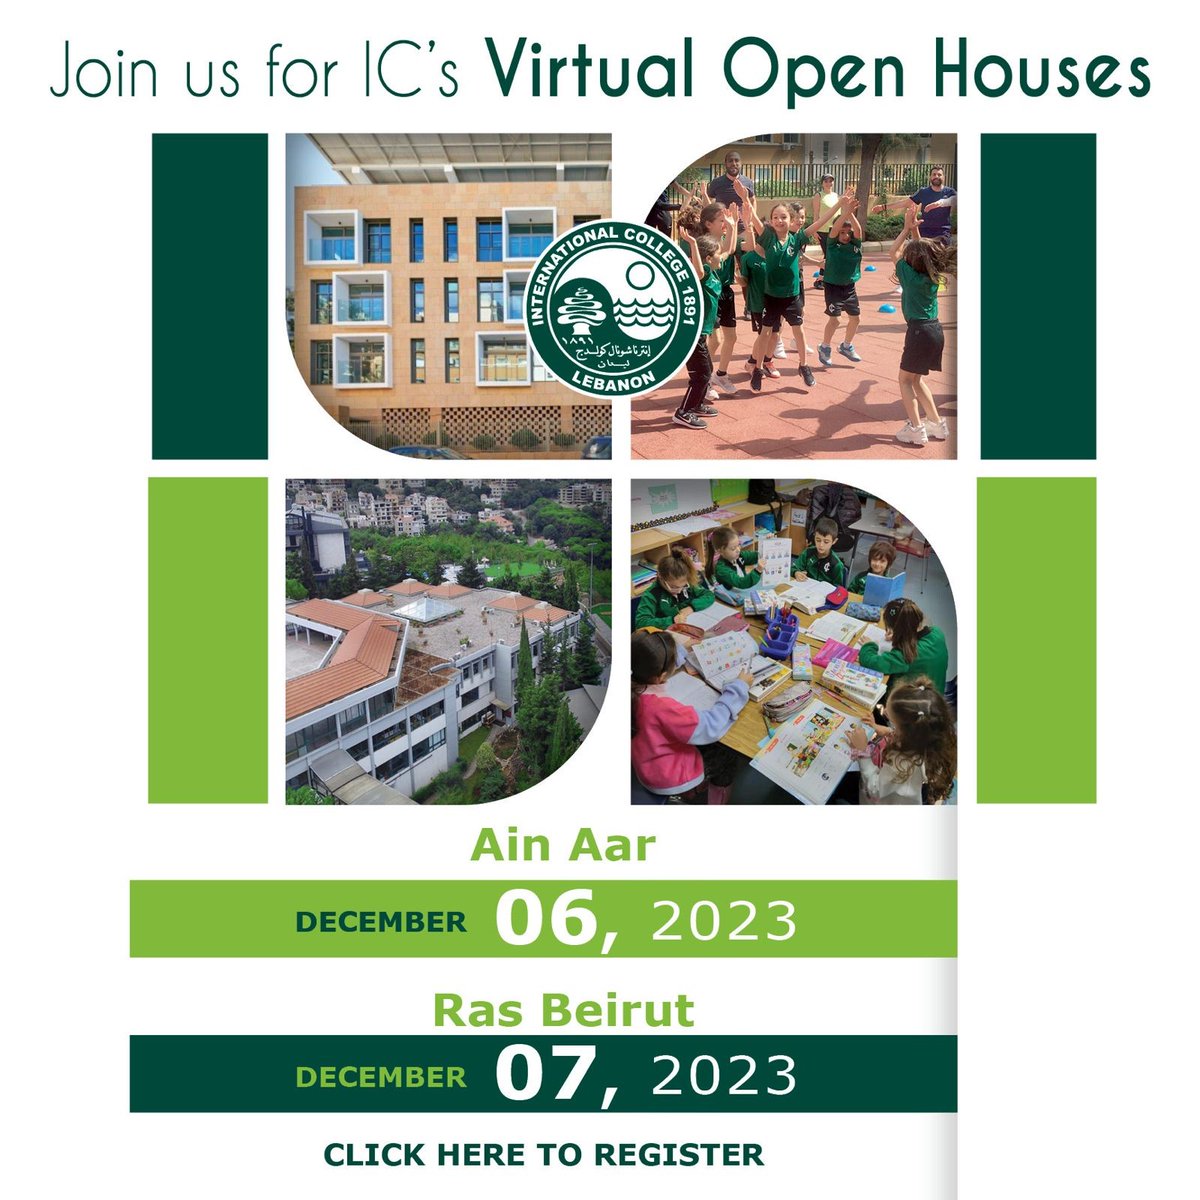 Join us for the Preschool Virtual Open Houses & learn about IC’s guiding statements, learner profile, definition of learning, 4 programs, Approaches to Learning & accreditations & listen to testimonials from parents, students & alumni. Visit the website to register.